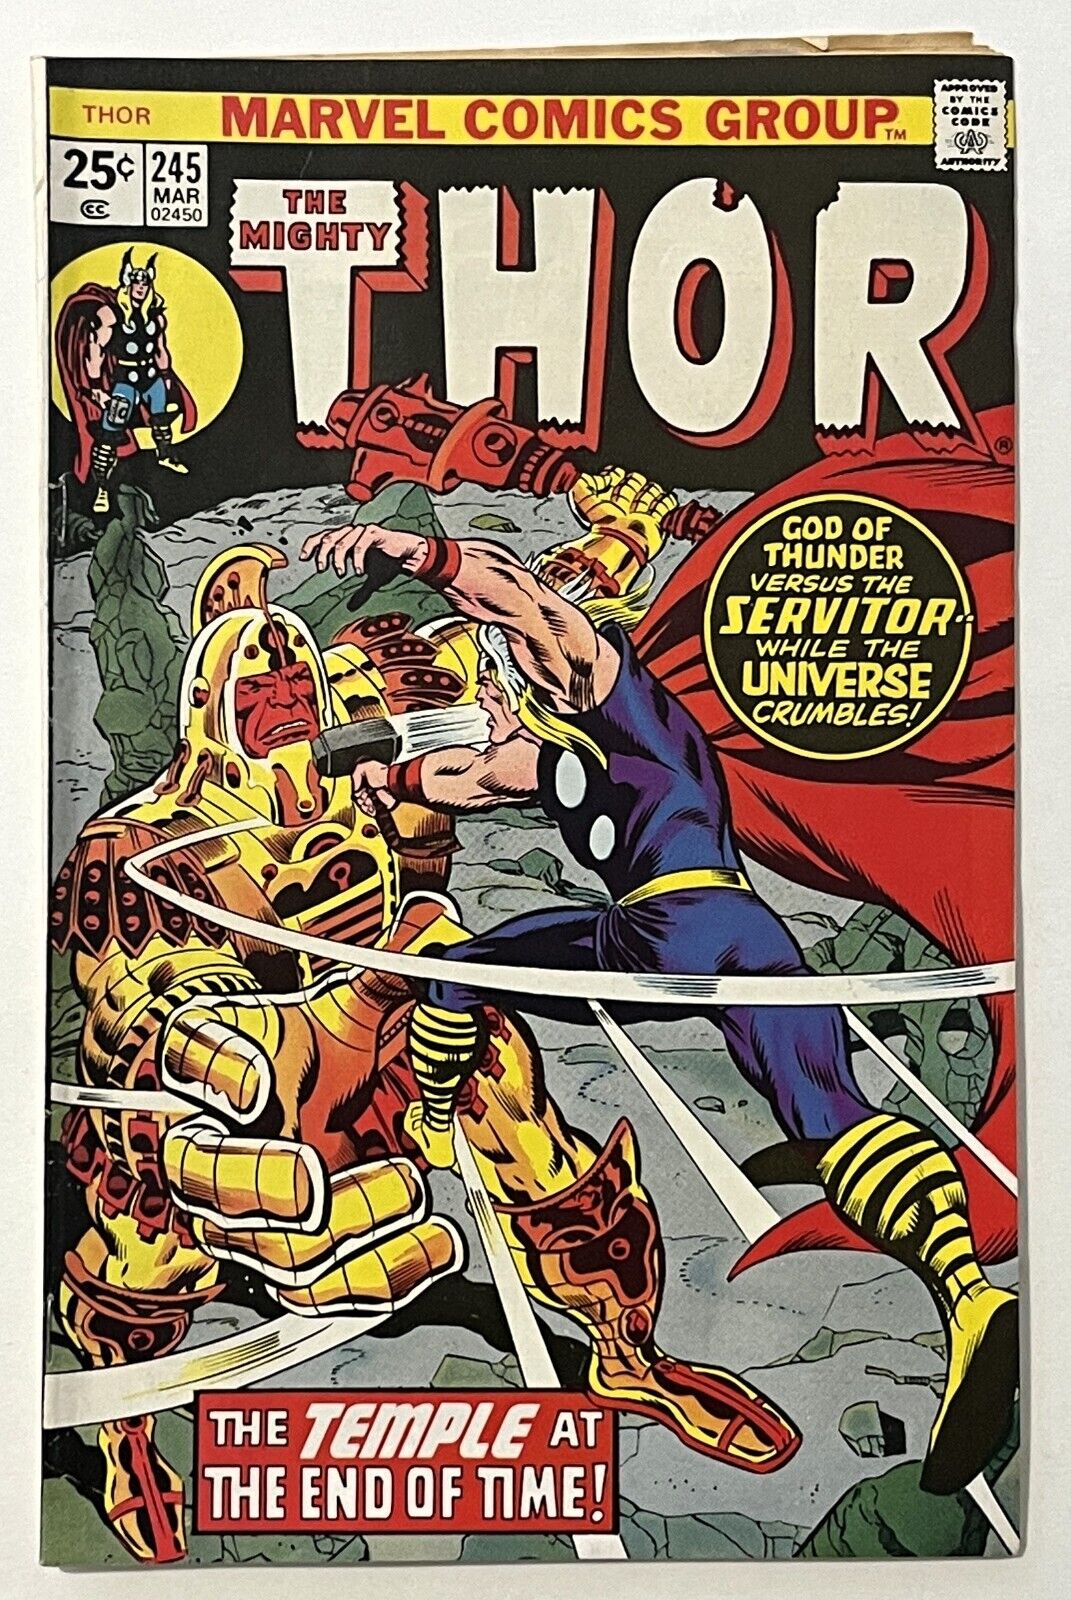 Thor #245 - Marvel Comics 1976 - VG - 1st Appearance or He Who Remains - Key